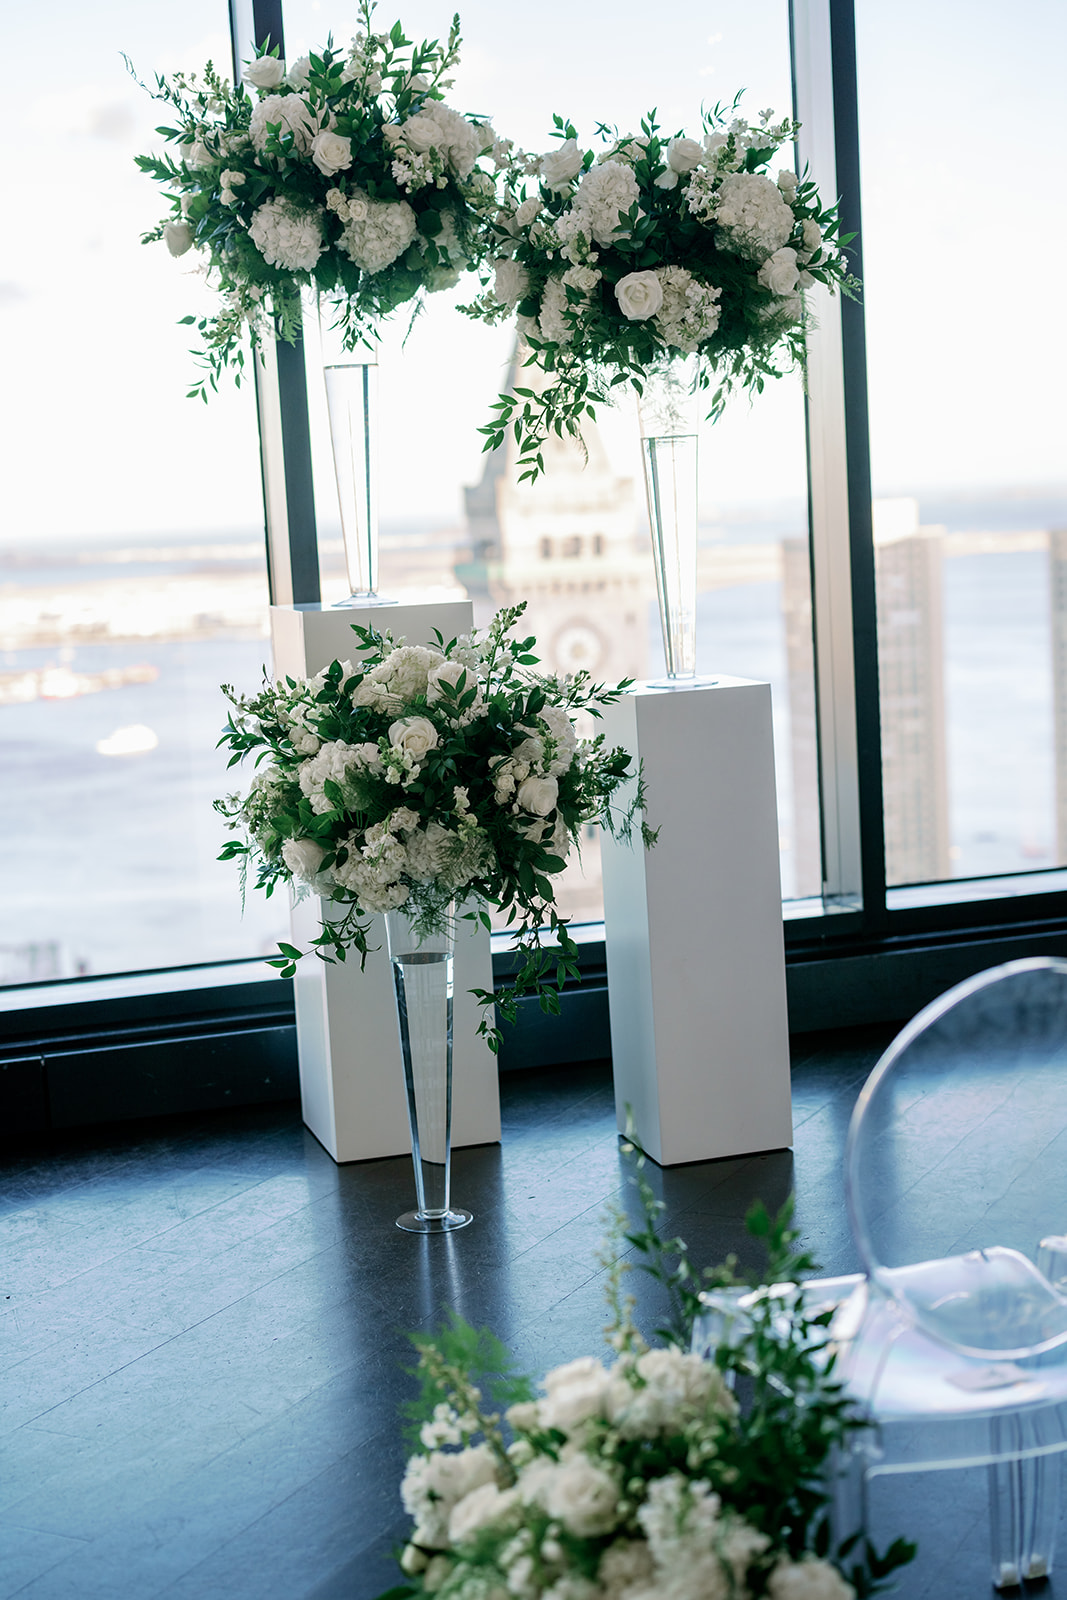 Winter wedding ceremony backdrop with elegant floral arrangements on white pedestals at the State Room in Boston.